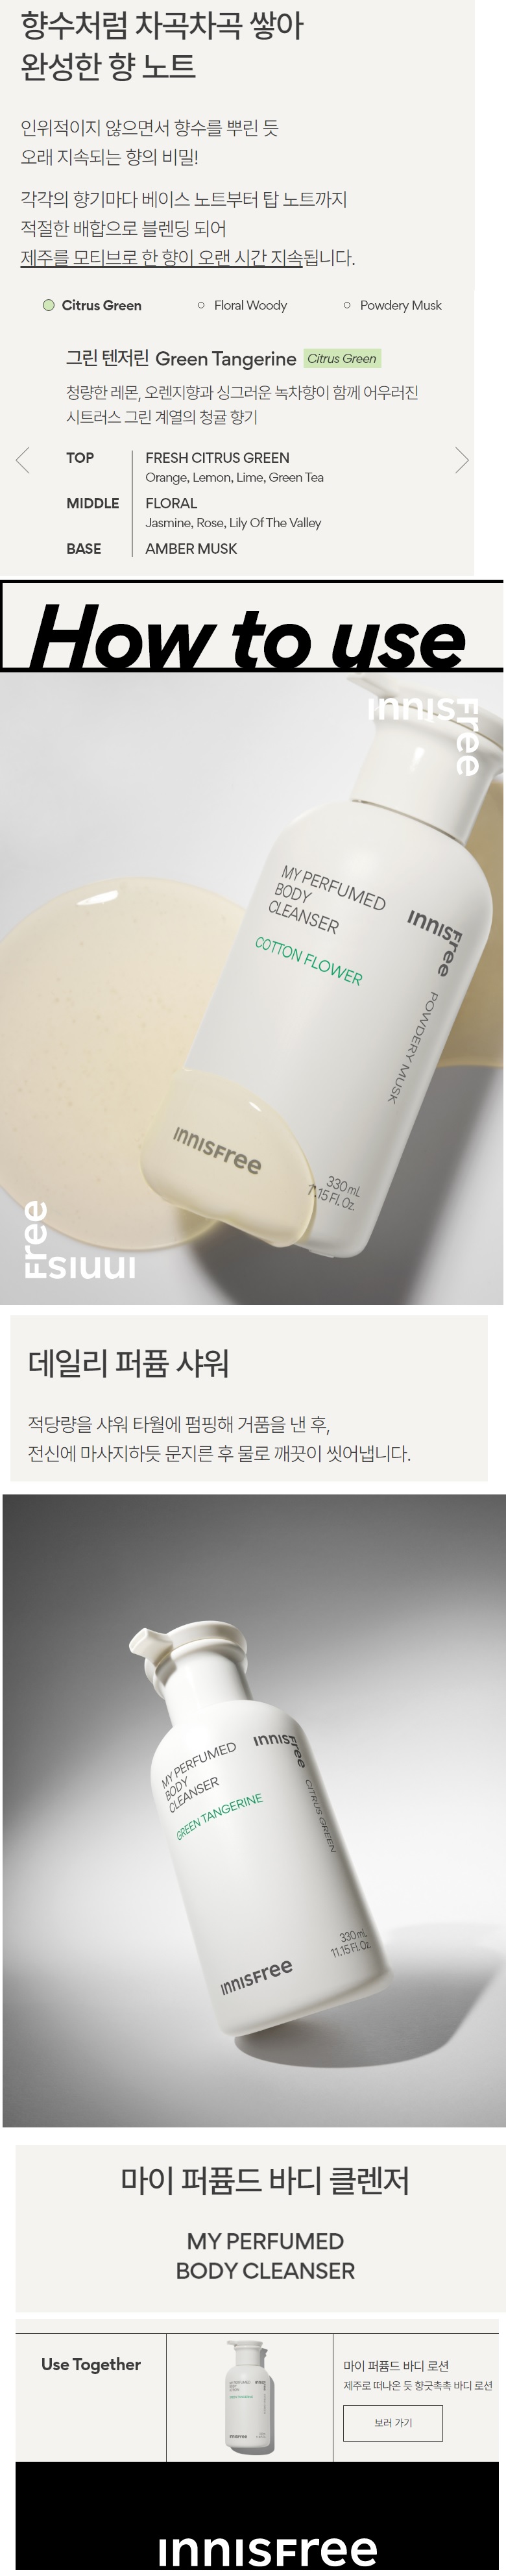 Innisfree My Perfumed Body Cleanser korean skincare product online shop malaysia denmark italy2